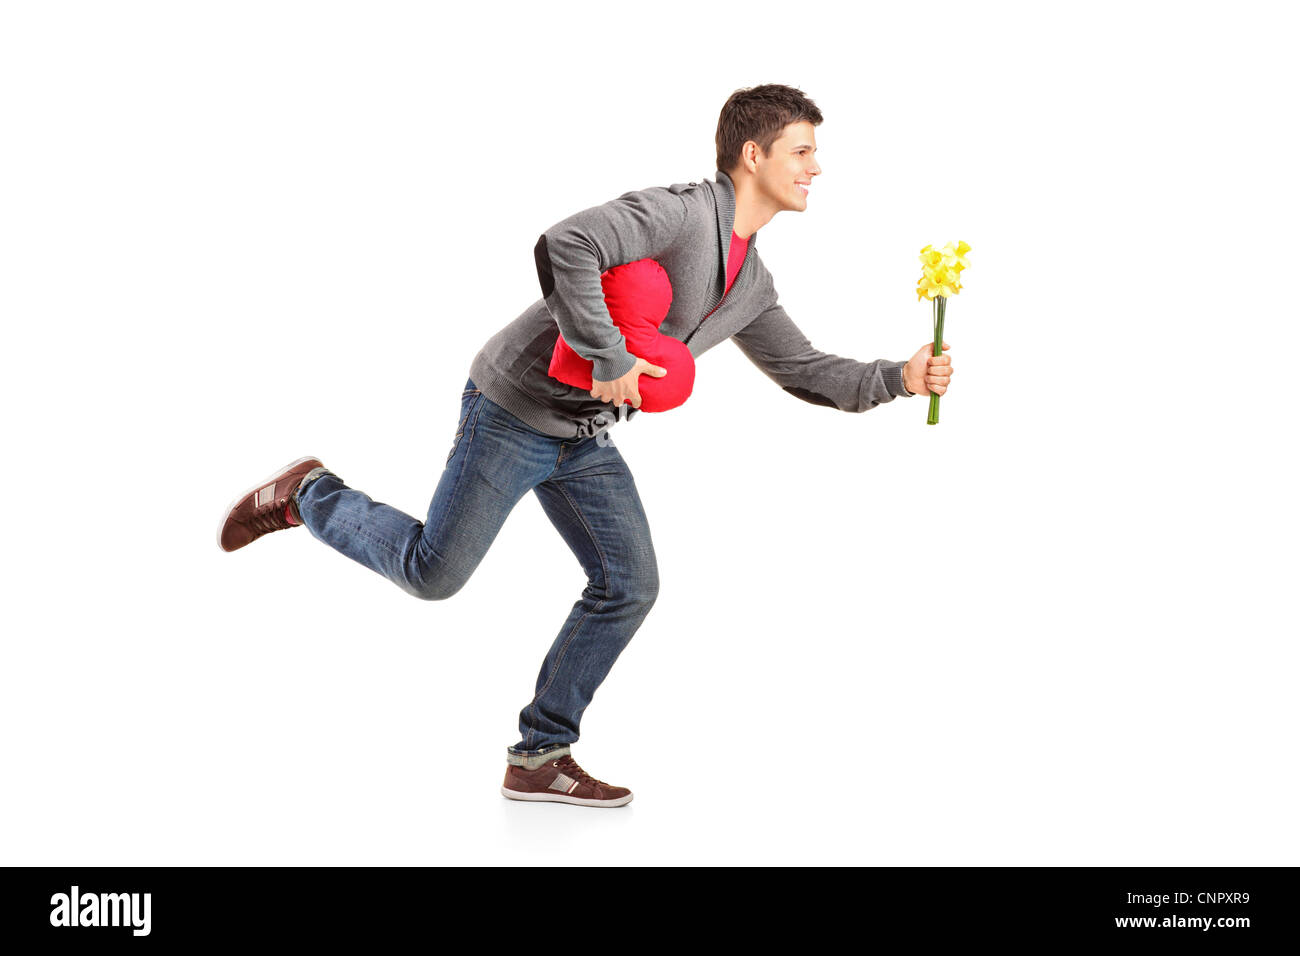 Young man running with a bunch of flowers and red heart shape object in his hands isolated on white background Stock Photo